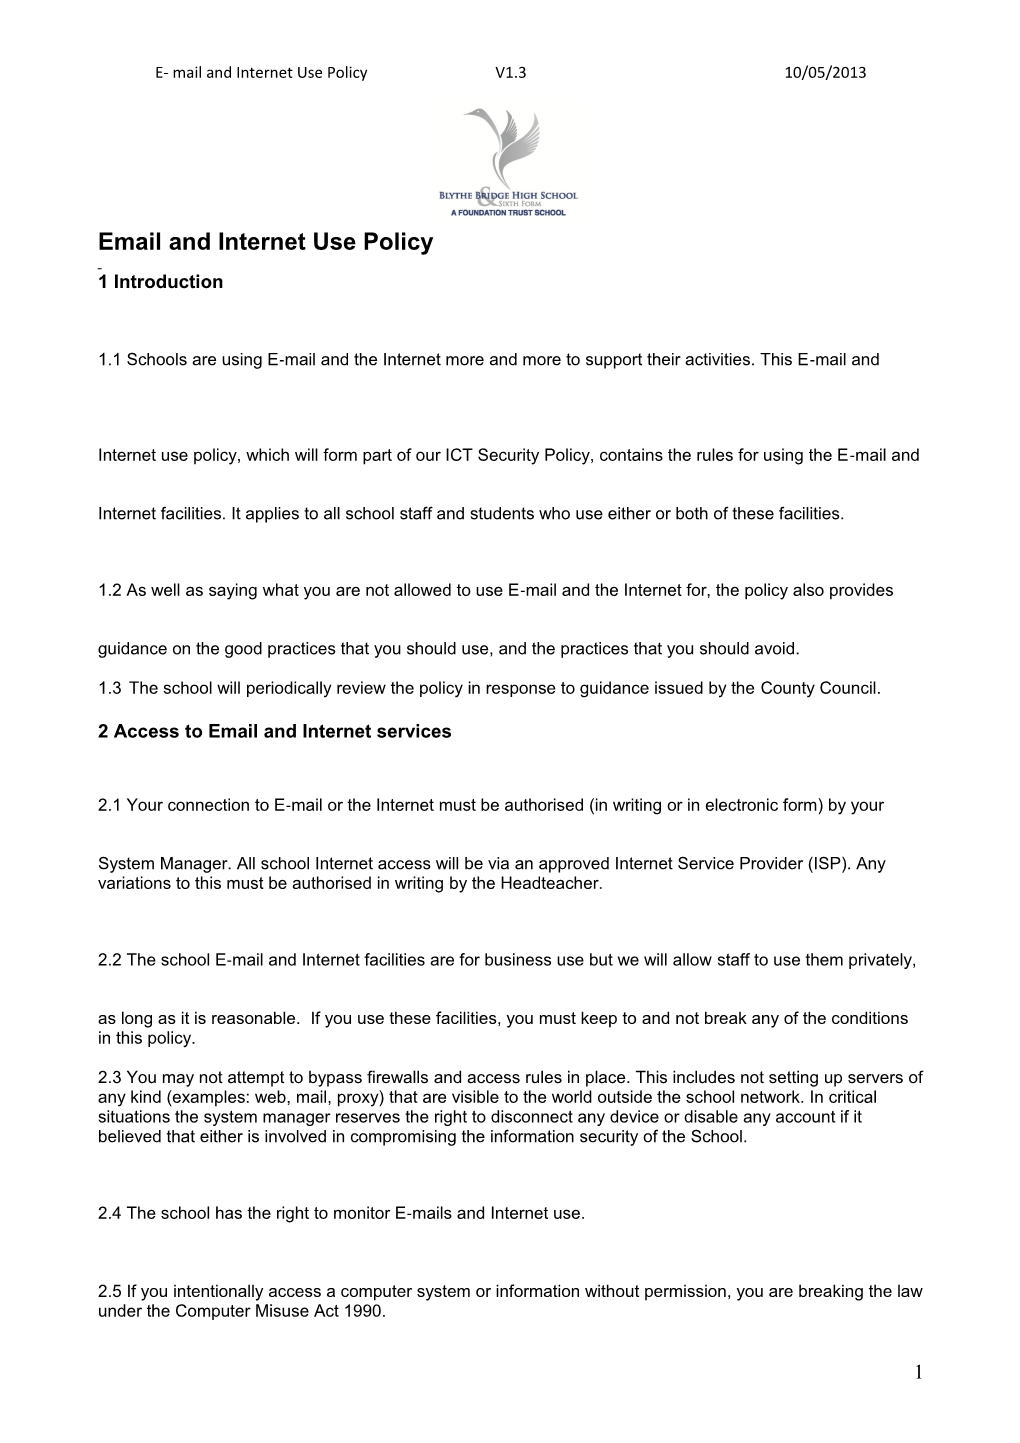 E Mail and Internet Use Policyv1.310/05/2013